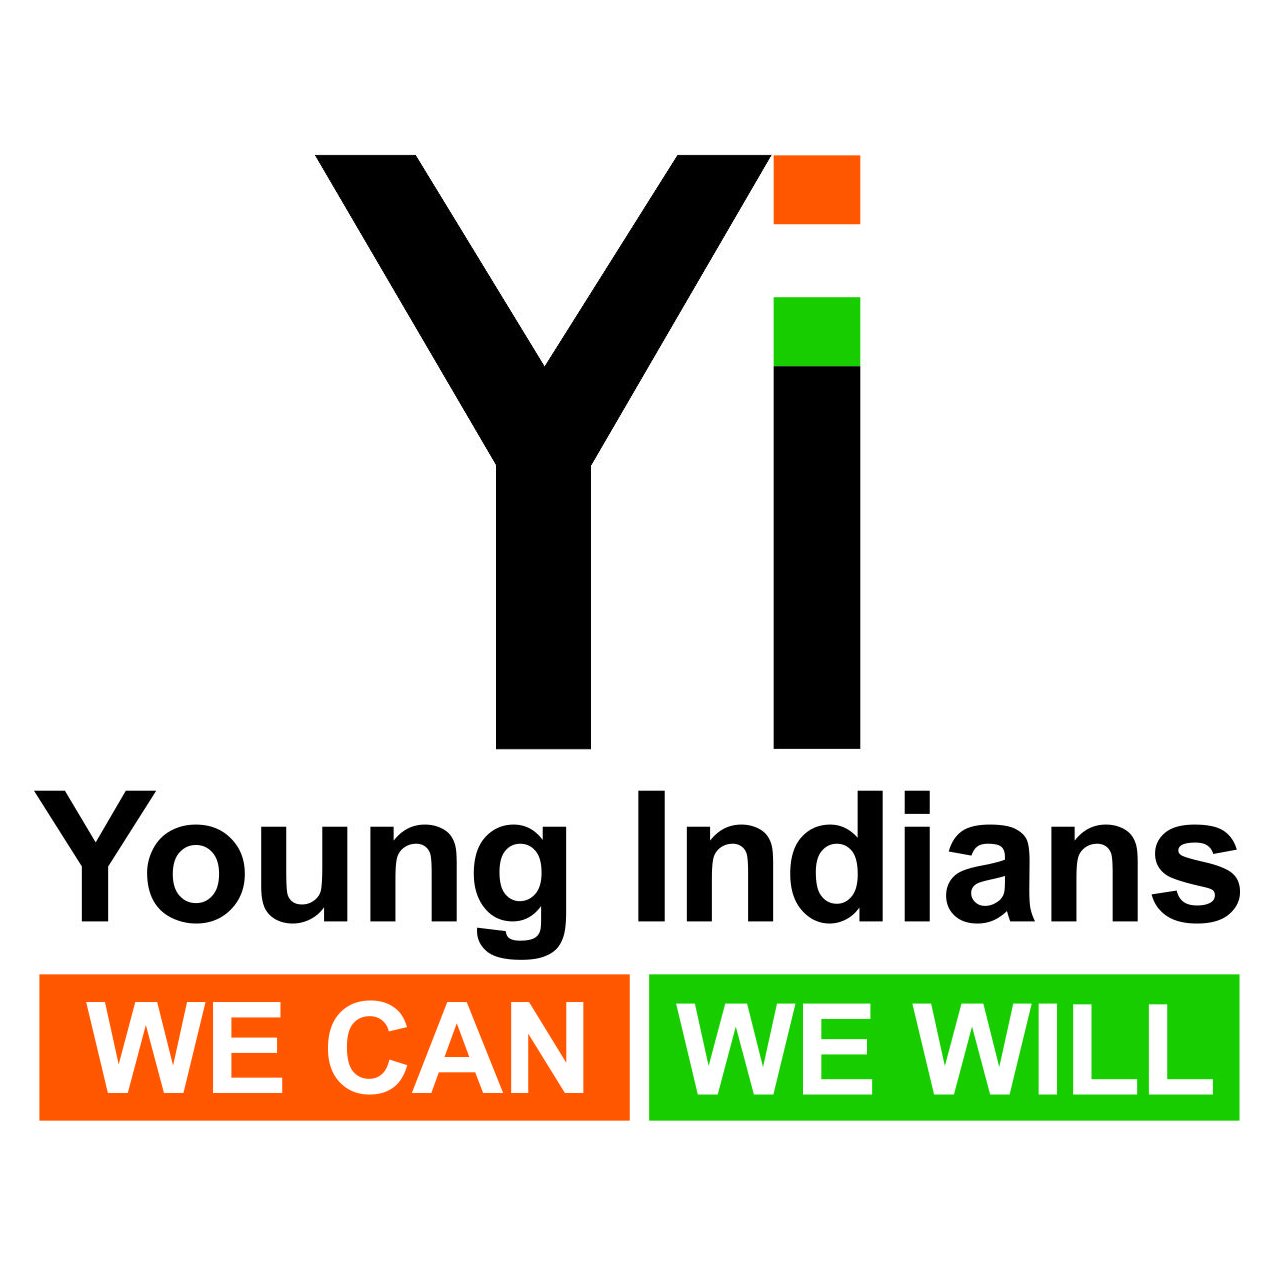 Official Twitter handle of Young Indians Bengaluru, part of Confederation of Indian Industry